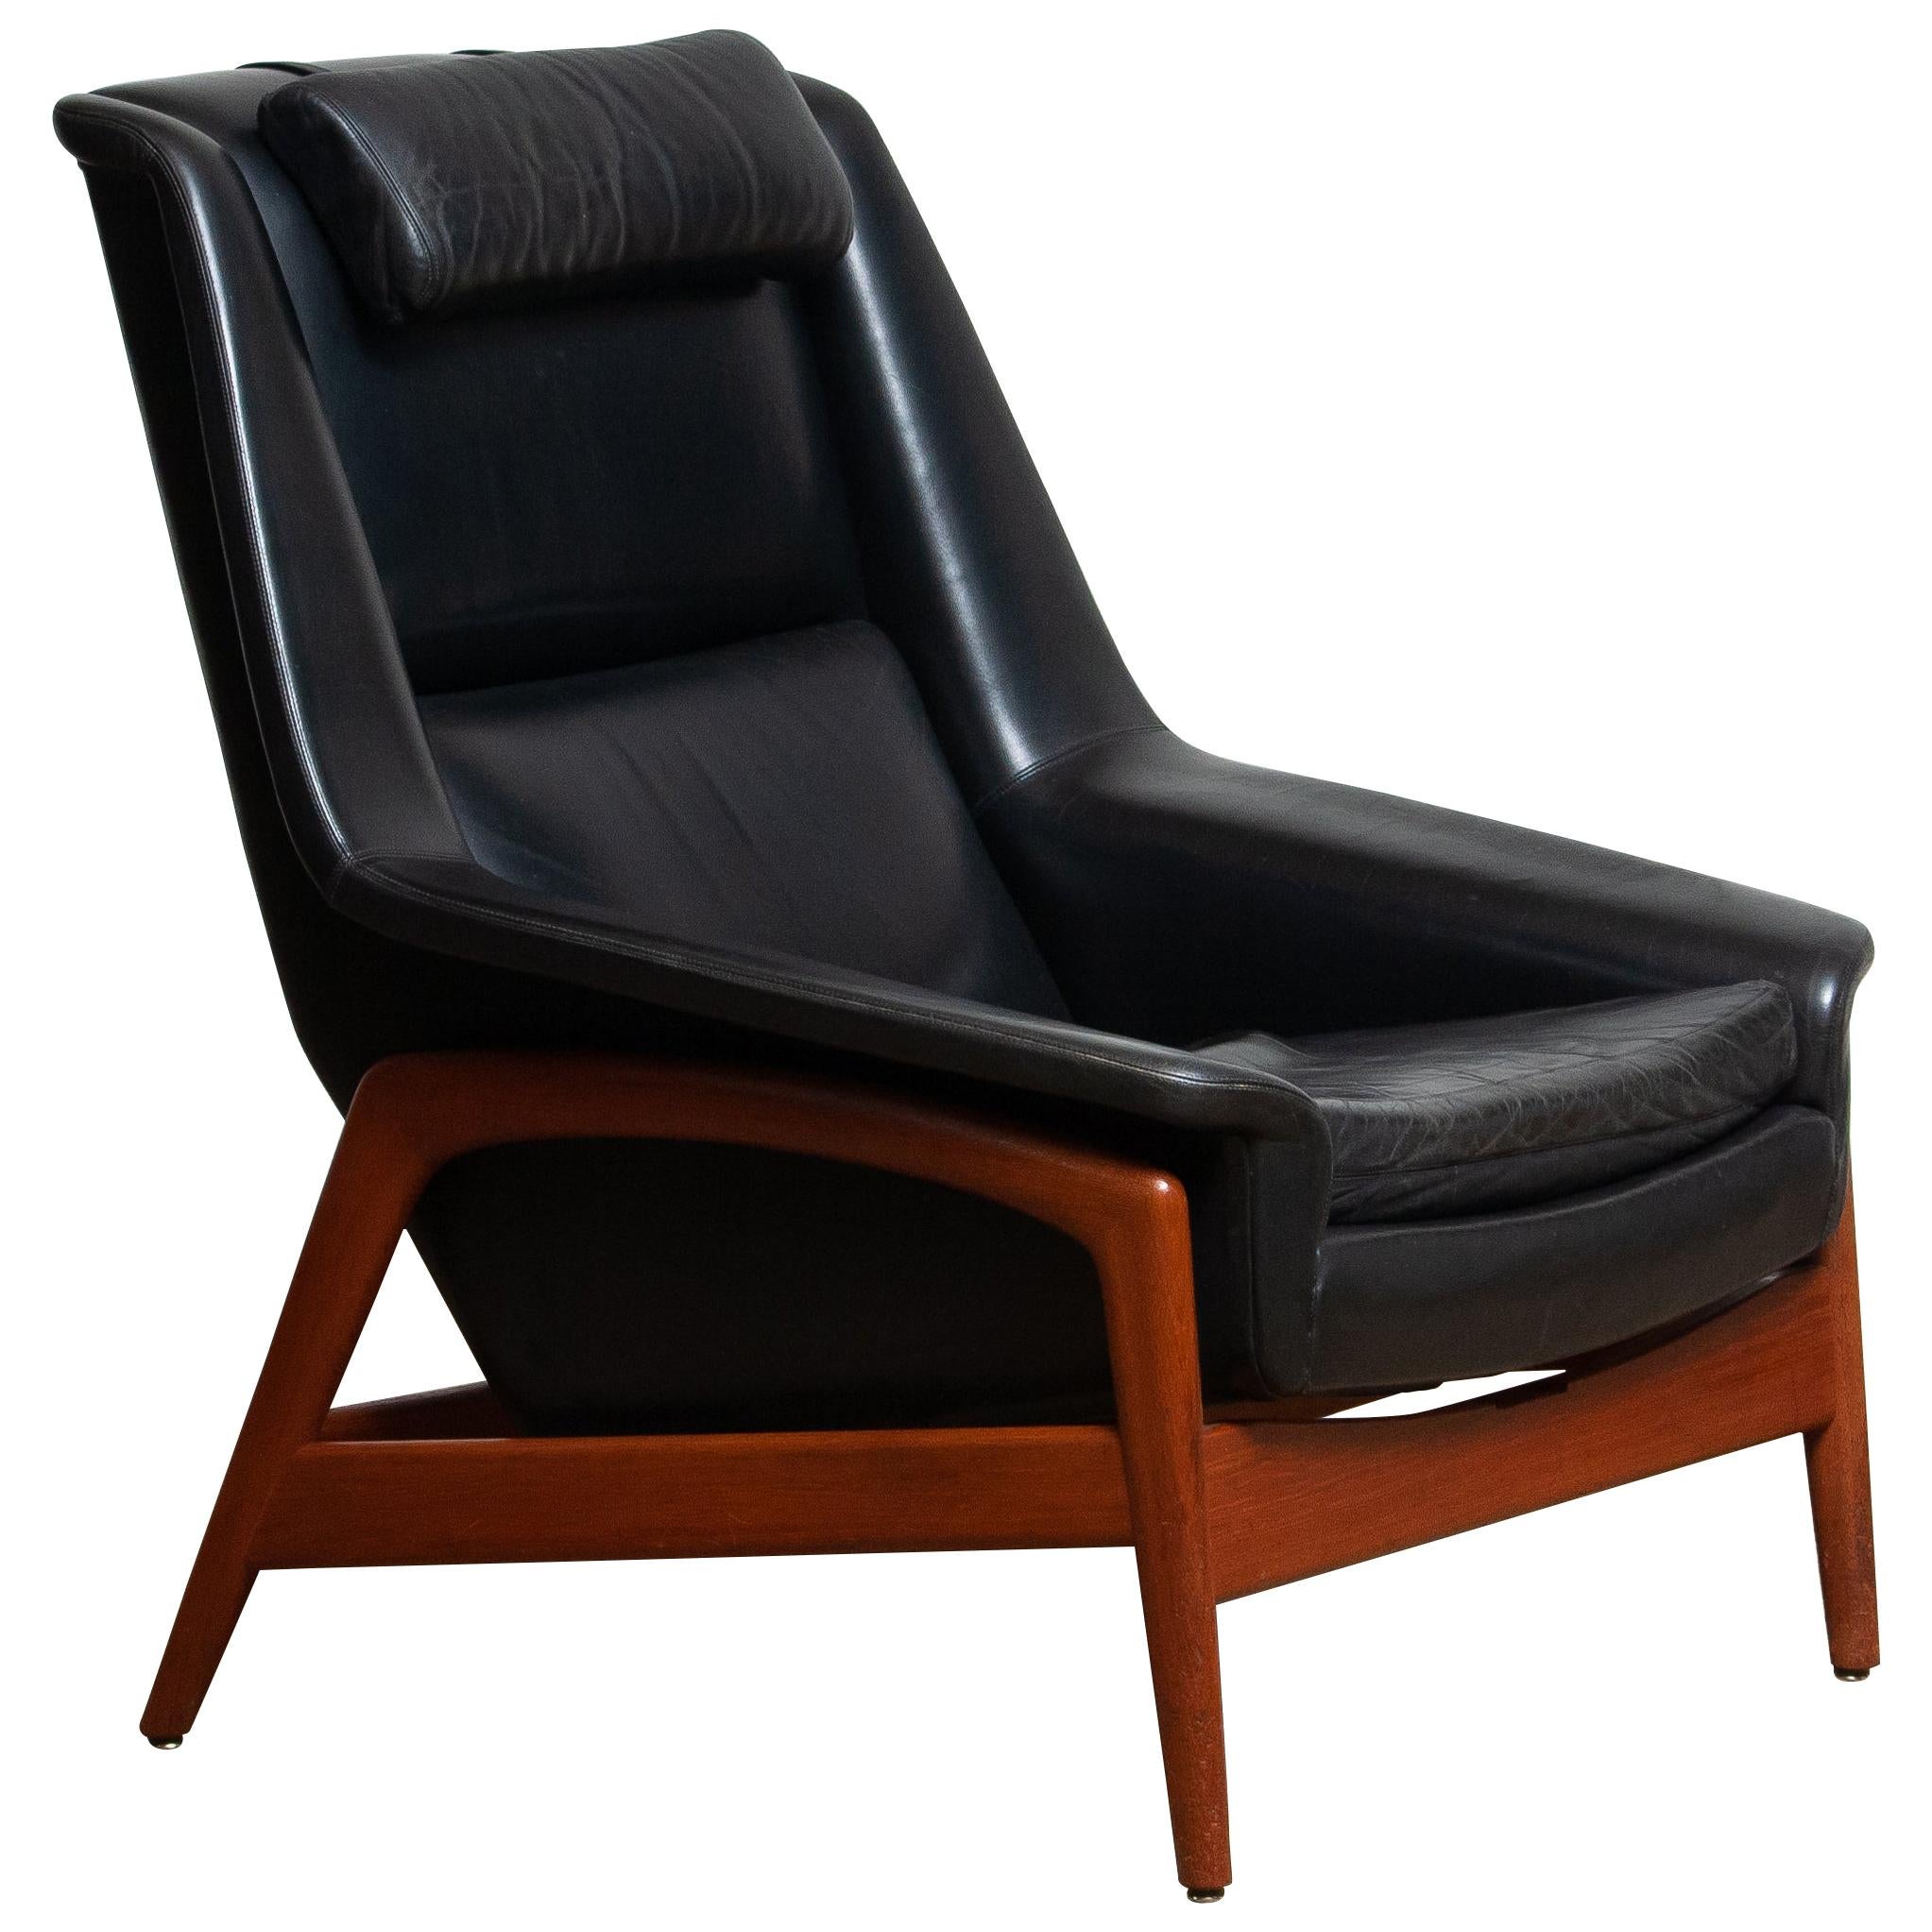 1960s, Lounge Chair 'Profil' by Folke Ohlsson for DUX in Black Leather and Teak